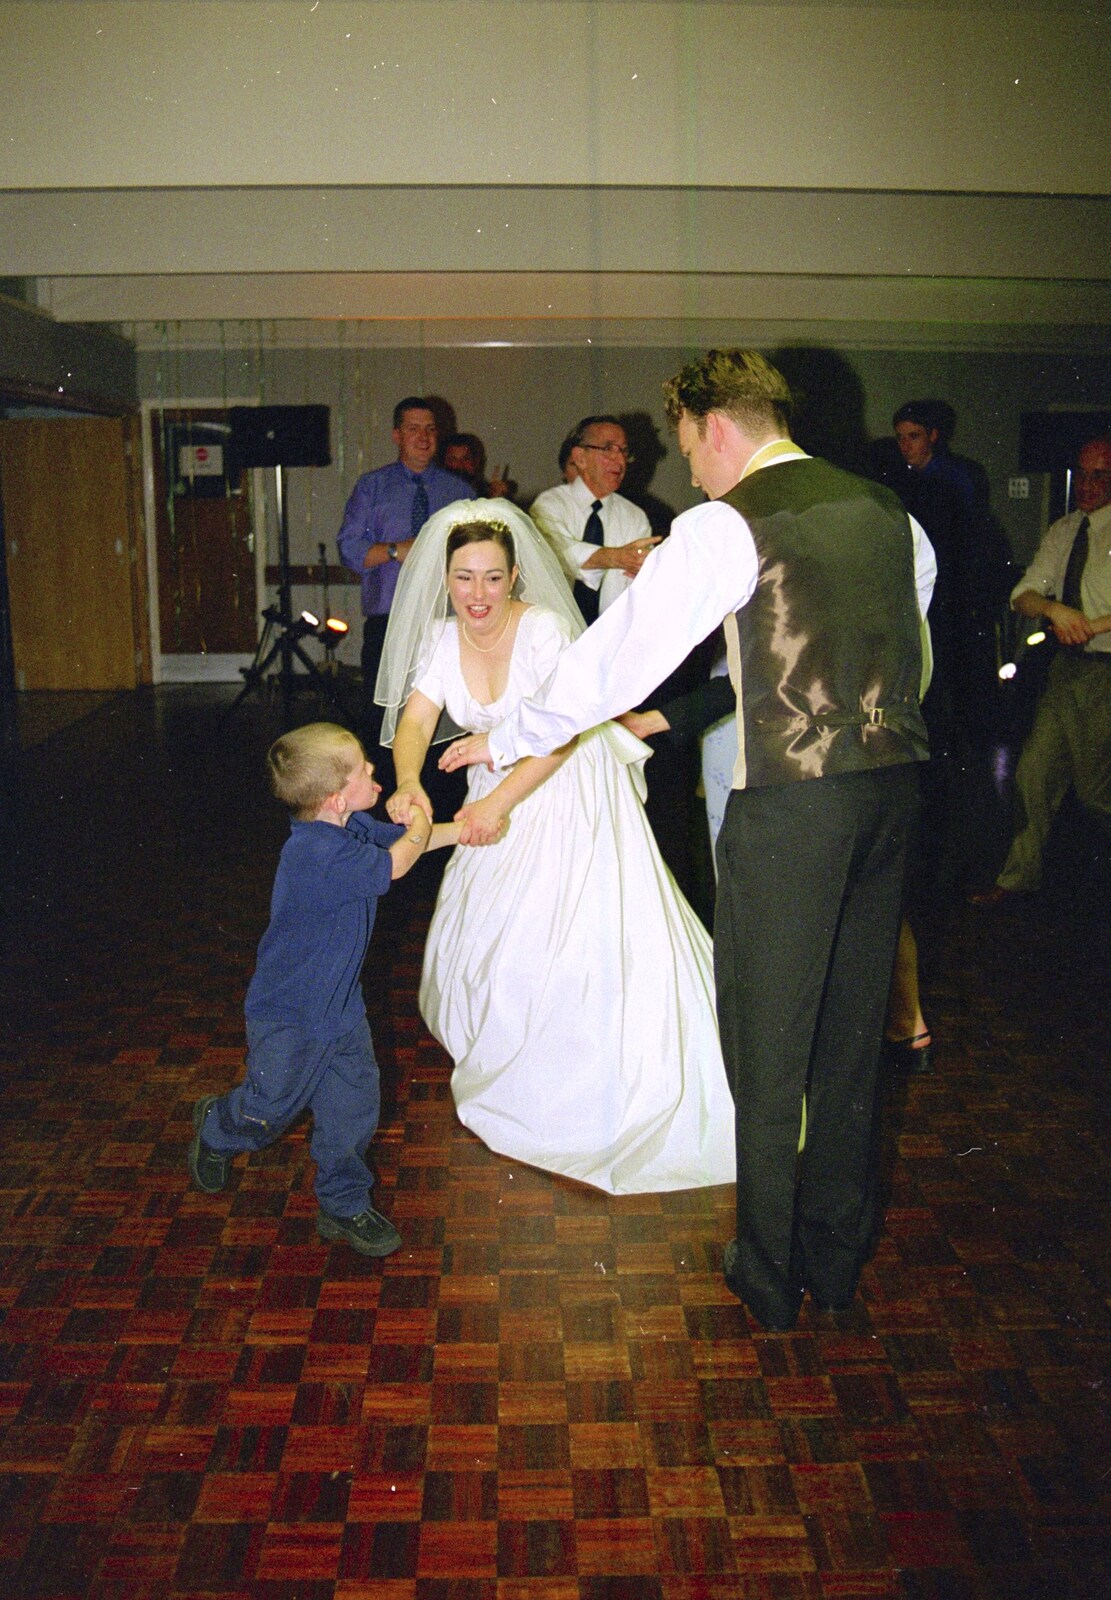 Lesley dances with a small child from Joe and Lesley's CISU Wedding, Ipswich, Suffolk - 30th July 1998